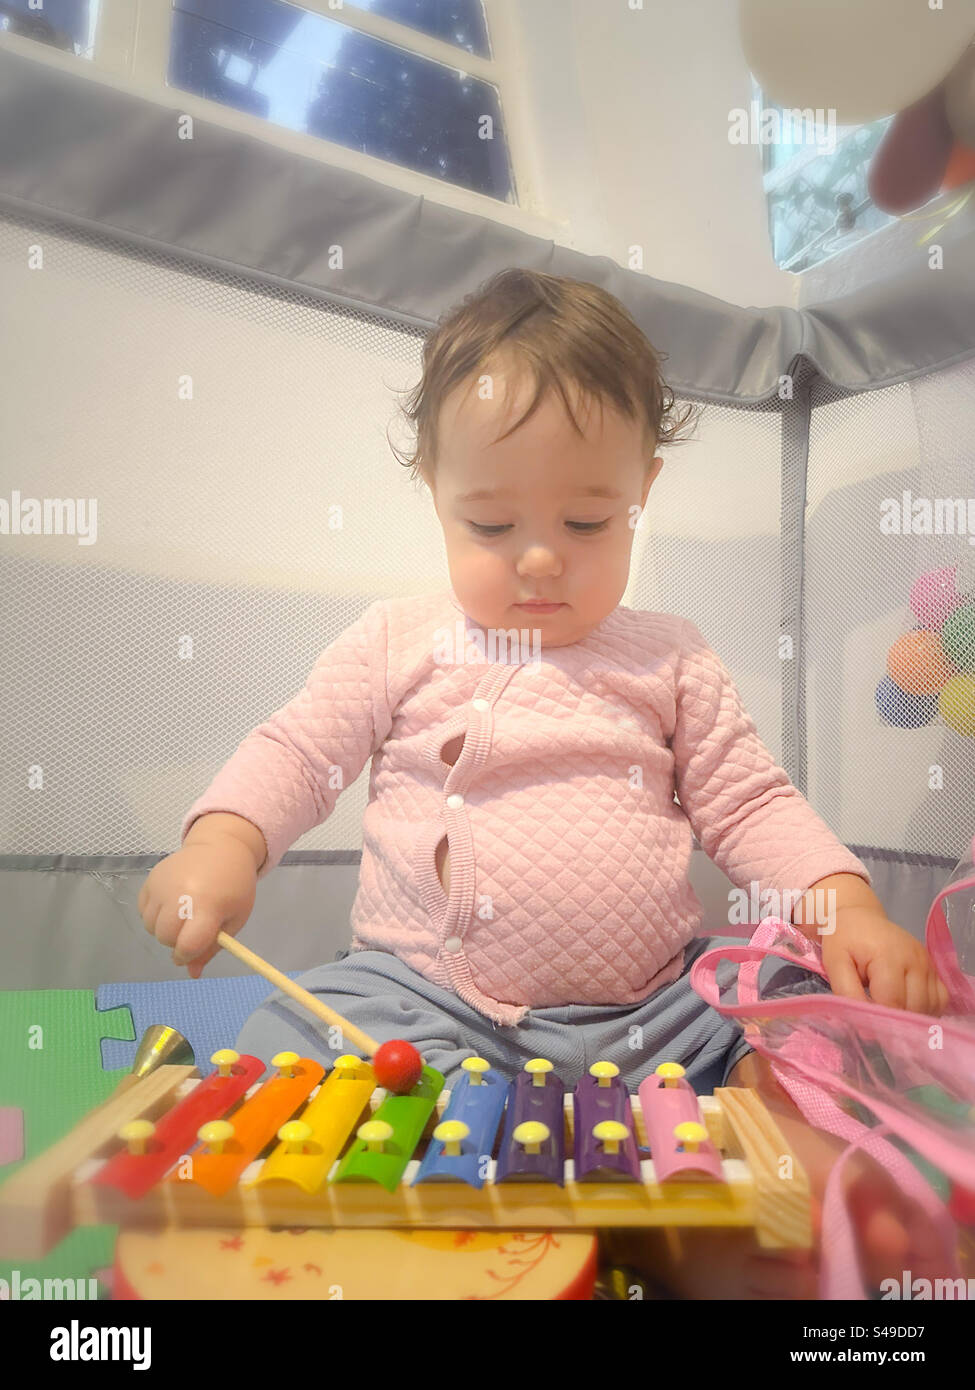 Baby beating xylophone. Babies and music. Stock Photo